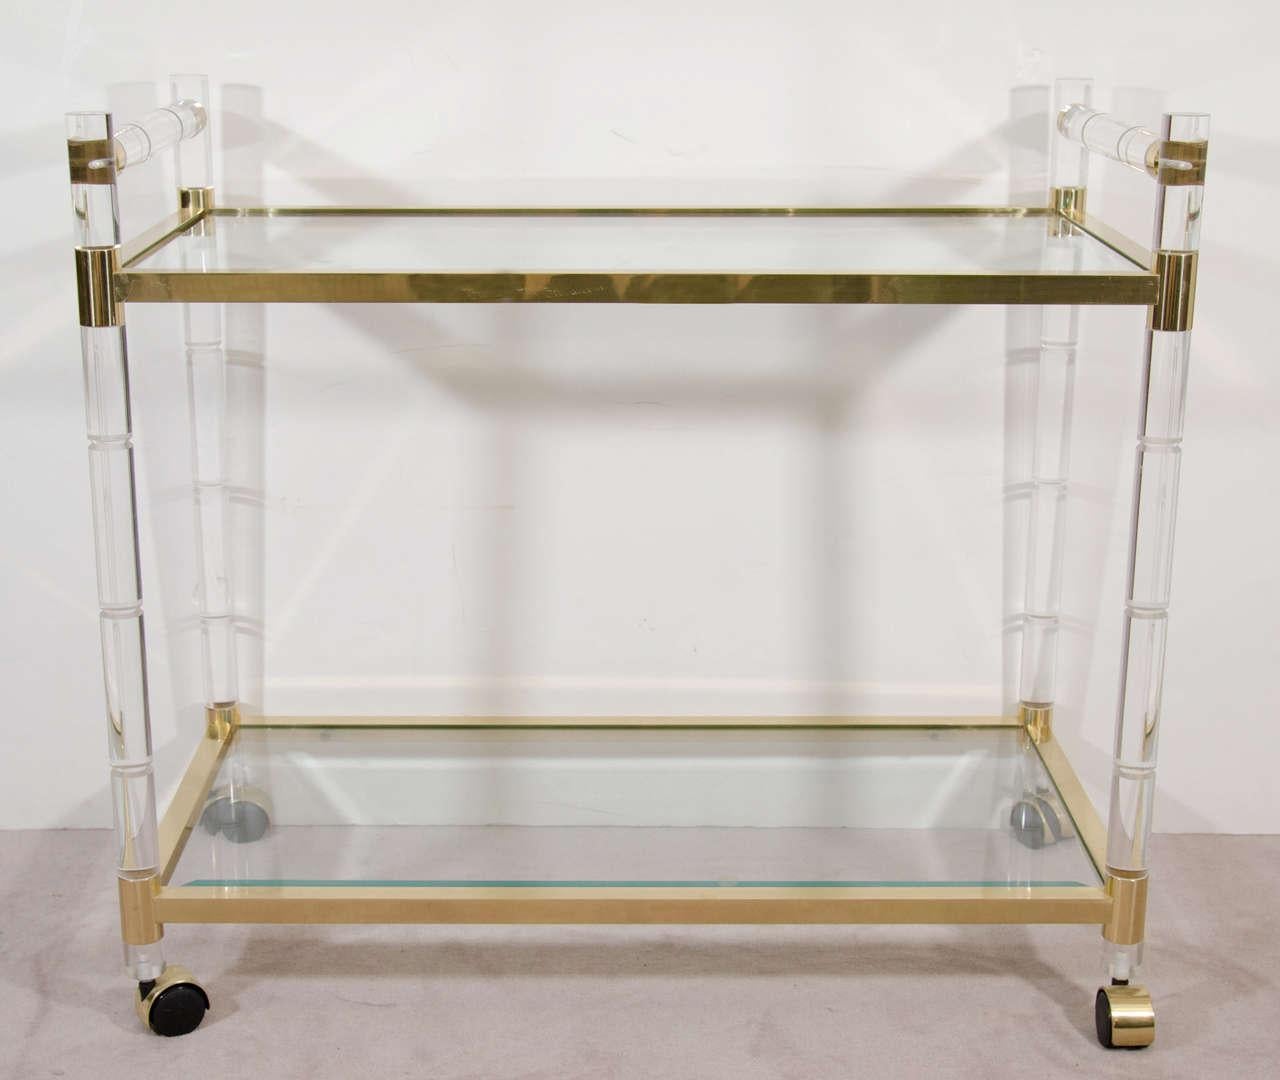 Bold but sleek, this brass-and-Lucite rolling cart designed by Charles Hollis Jones for his 'Regency Bamboo' line. Featuring faux-bamboo Lucite rails, brass frame with clear glass shelves. Casters ensure this sophisticated bar cart is every bit as